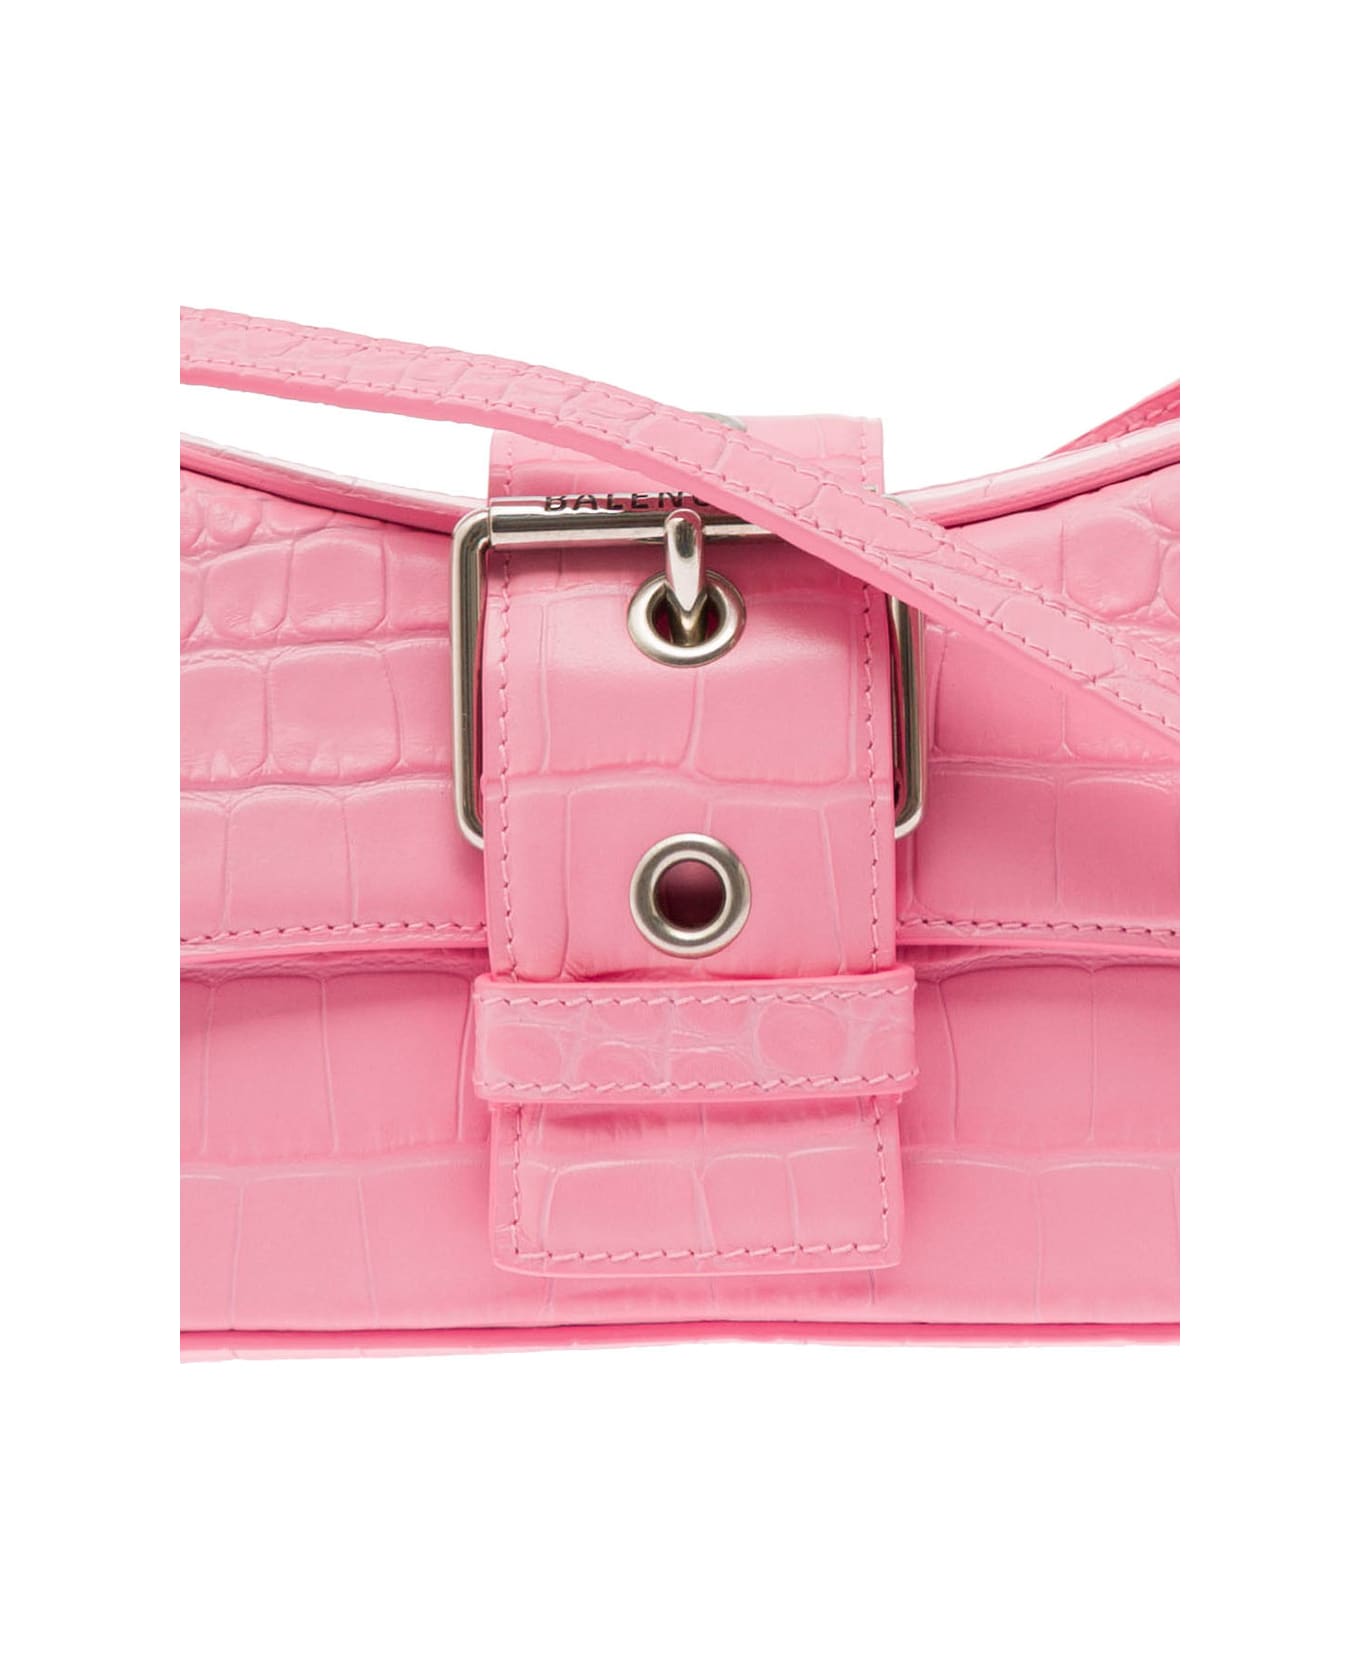 Balenciaga Lindsay Pink Small Shoulder Bag With Strap In Matte Crocodile Embossed Leather Wth Aged-silver Hardware Balenciaga Woman - Pink